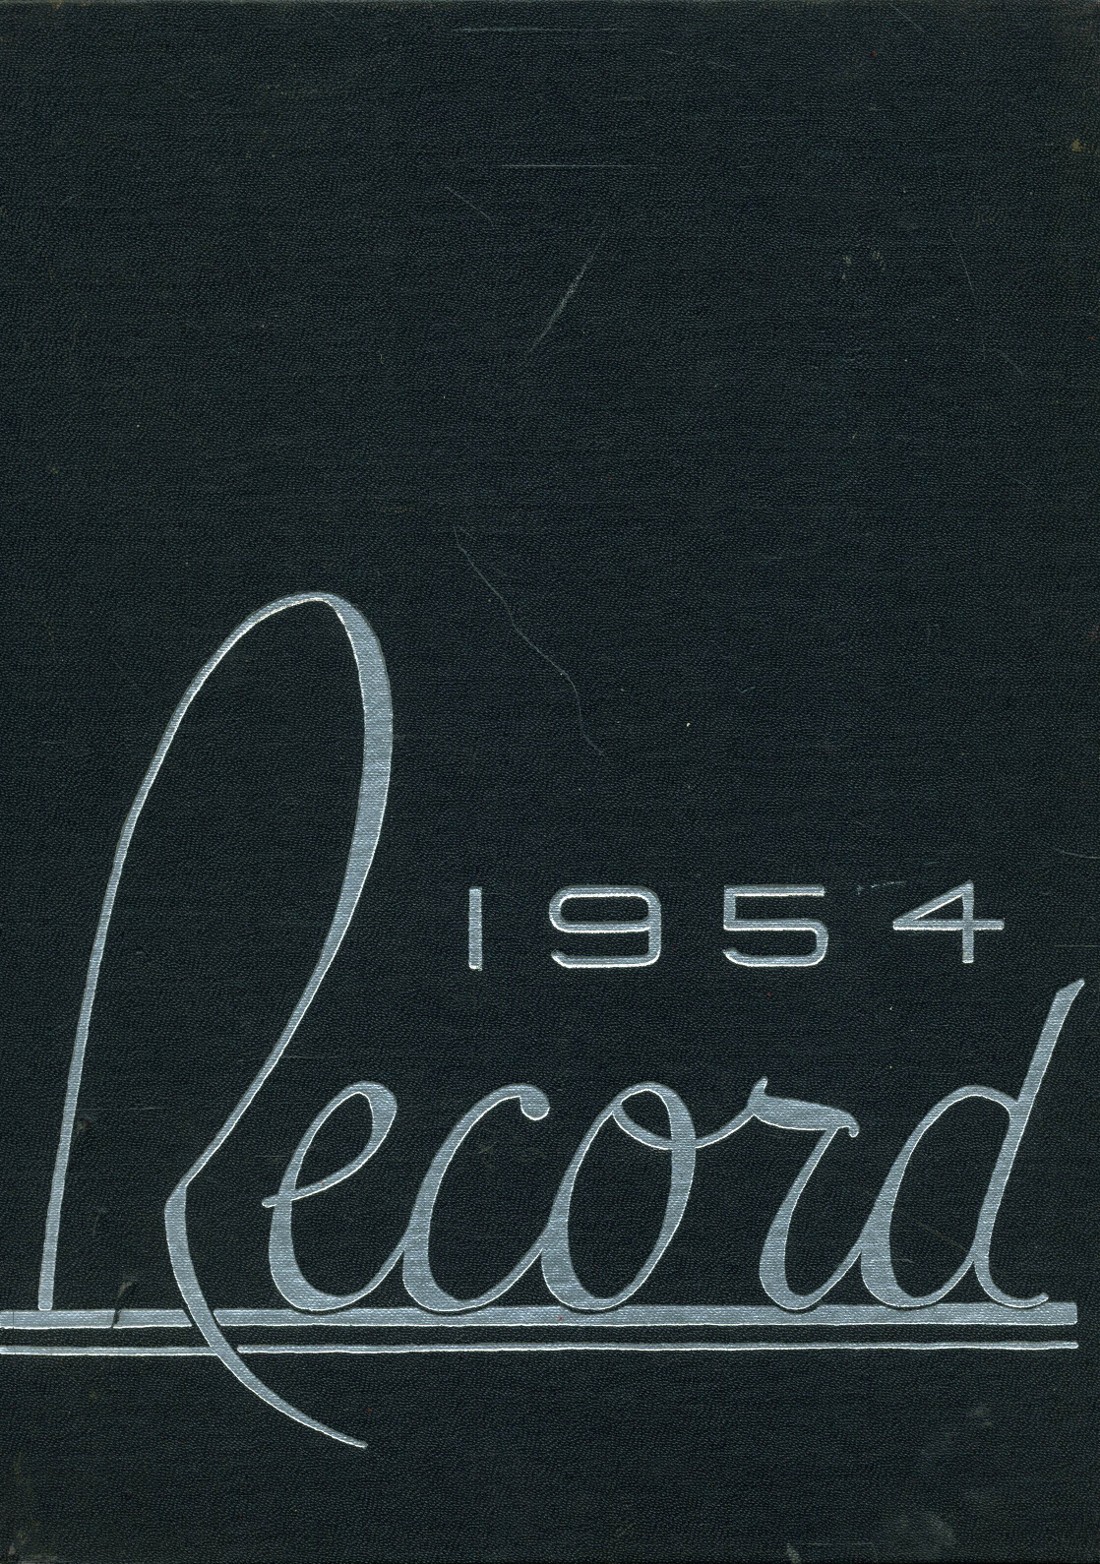 1954 yearbook from Littleton High School from Littleton, New Hampshire